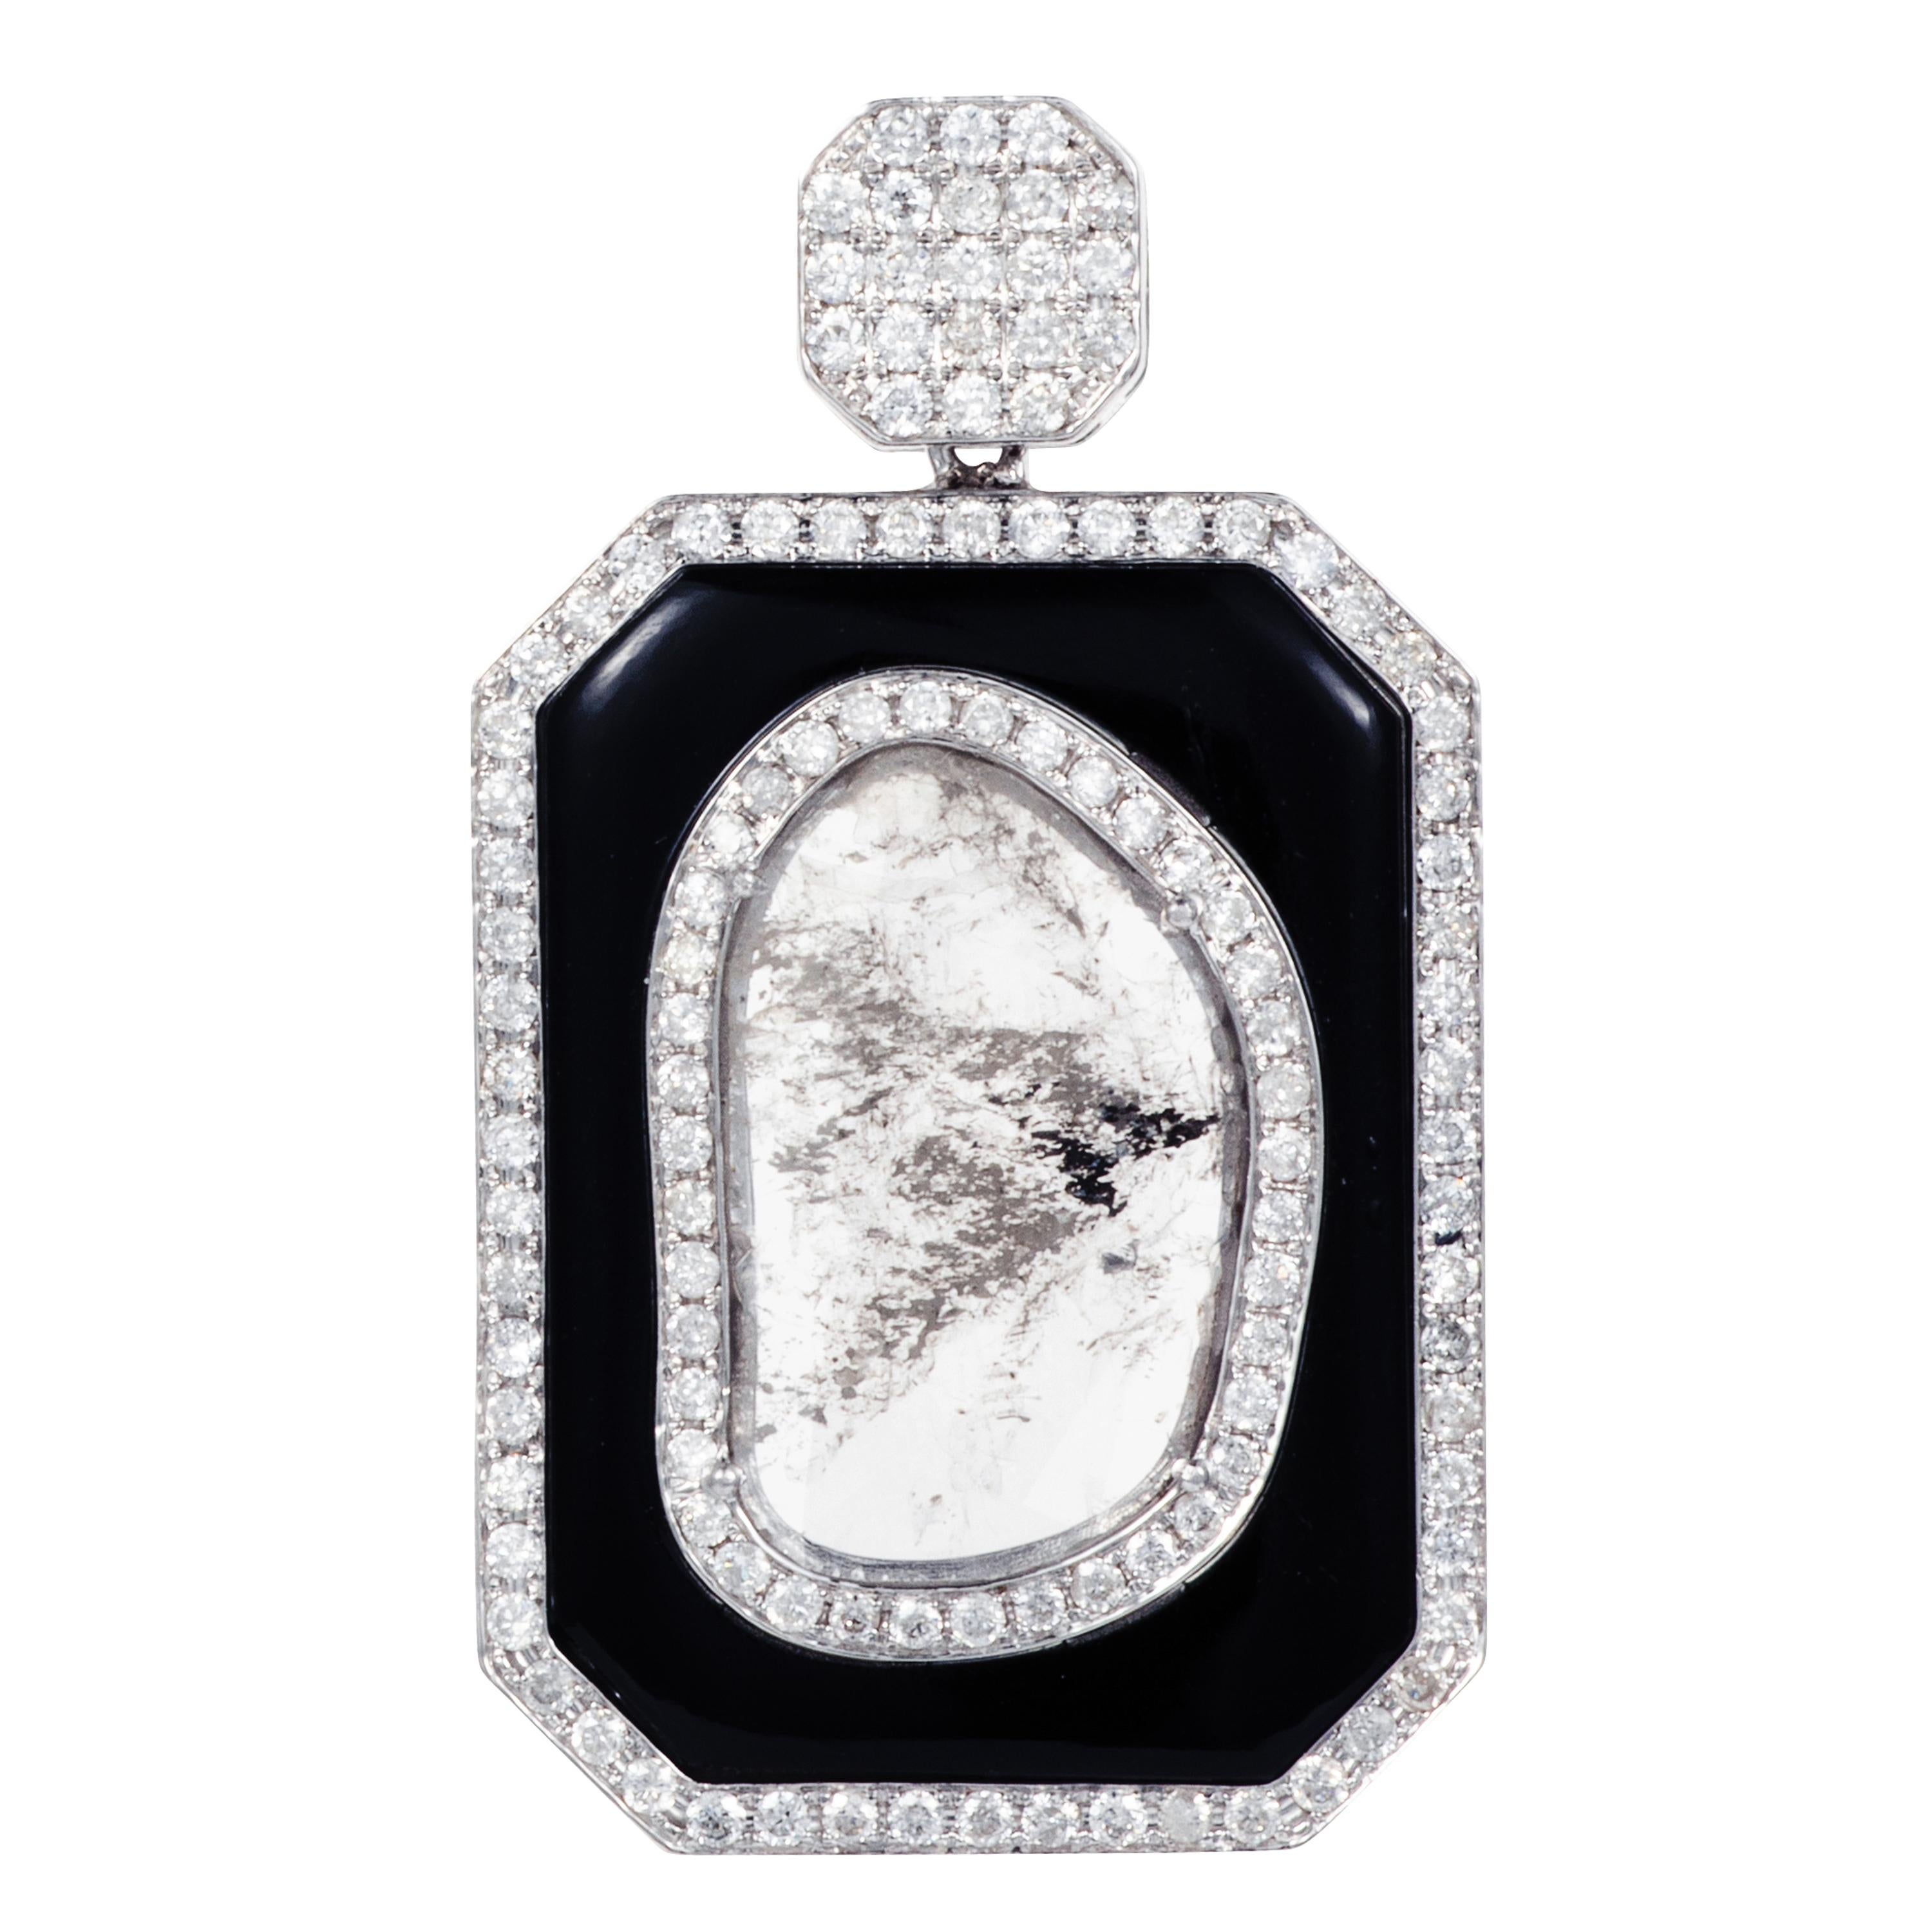 Gross weight: 10.76 grams
Gold weight: 8.50 grams
Diamond weight: 4.13 carat

Two slice diamonds encased in black onyx create a pair of striking earrings with design inspired by the Art Deco period.  Manpriya B is renowned for her work with slice